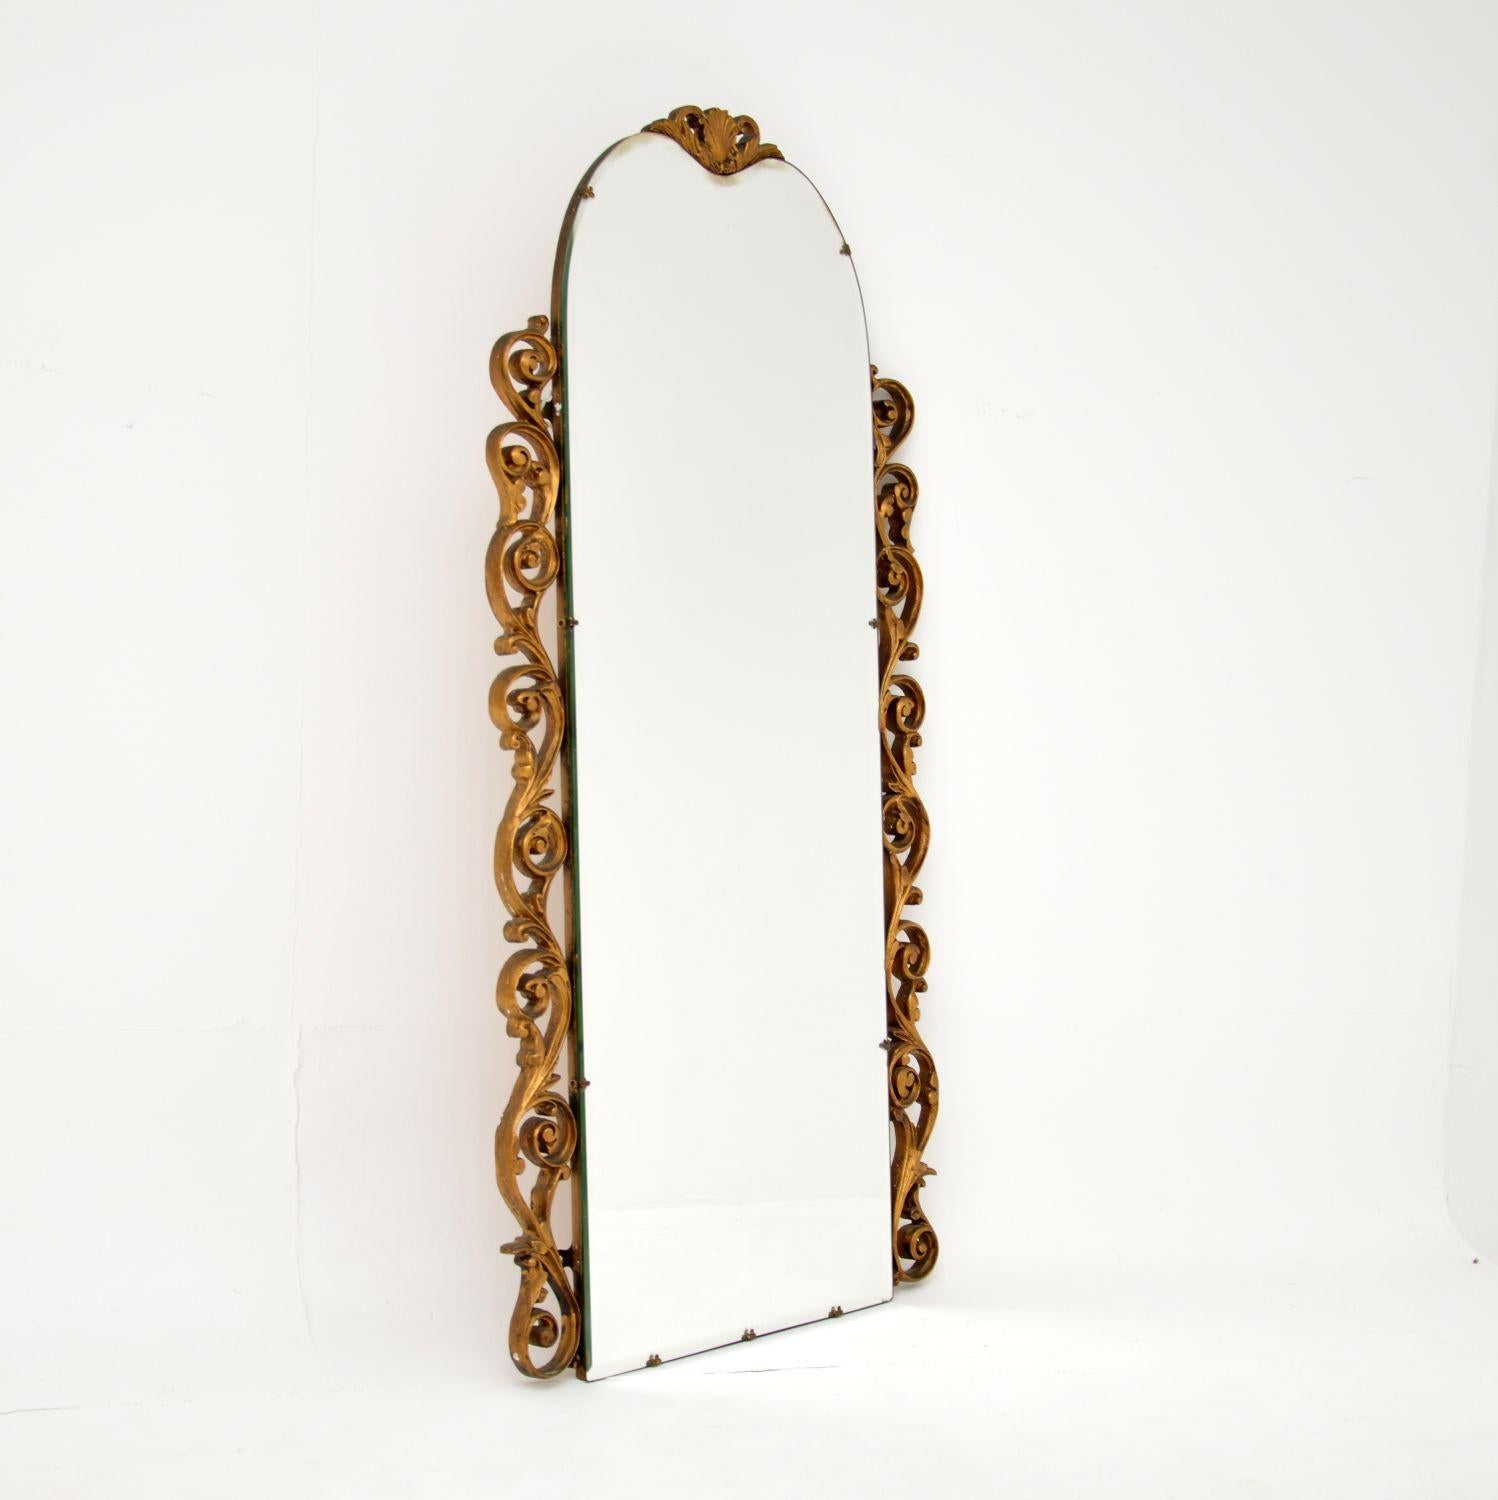 A stunning antique French decorative mirror, dating from around the 1930s.

It is beautifully made from wood and gesso, with a gorgeous gilt finish. This is a lovely slim size, practical for use in various settings around the home.

The